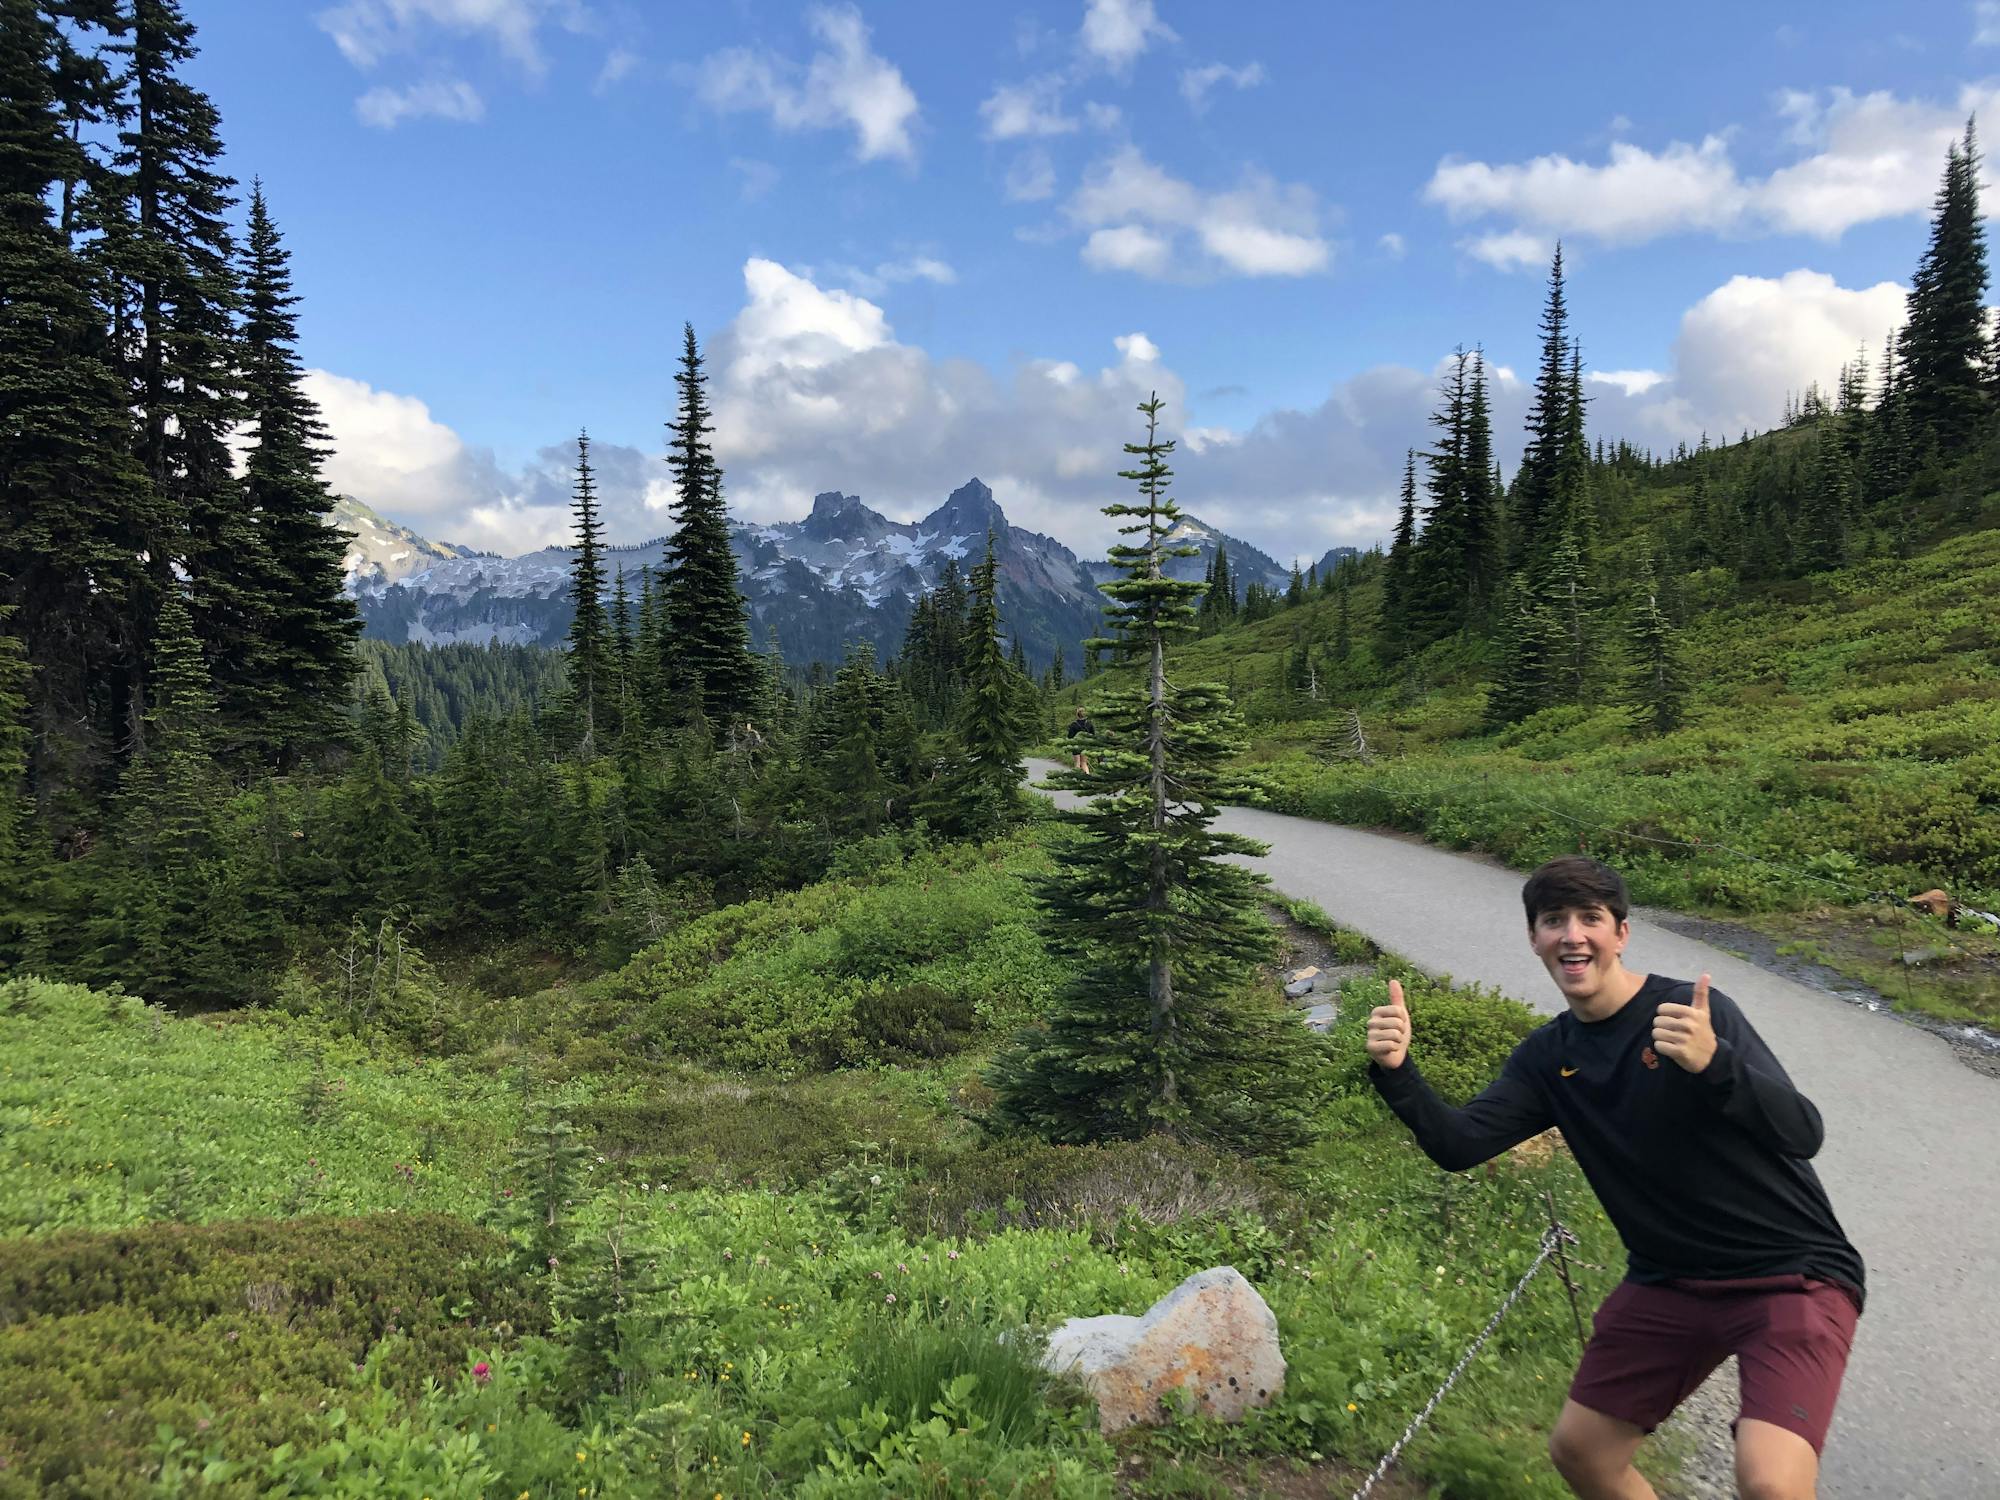 Young man poses out in nature with mountains in the background